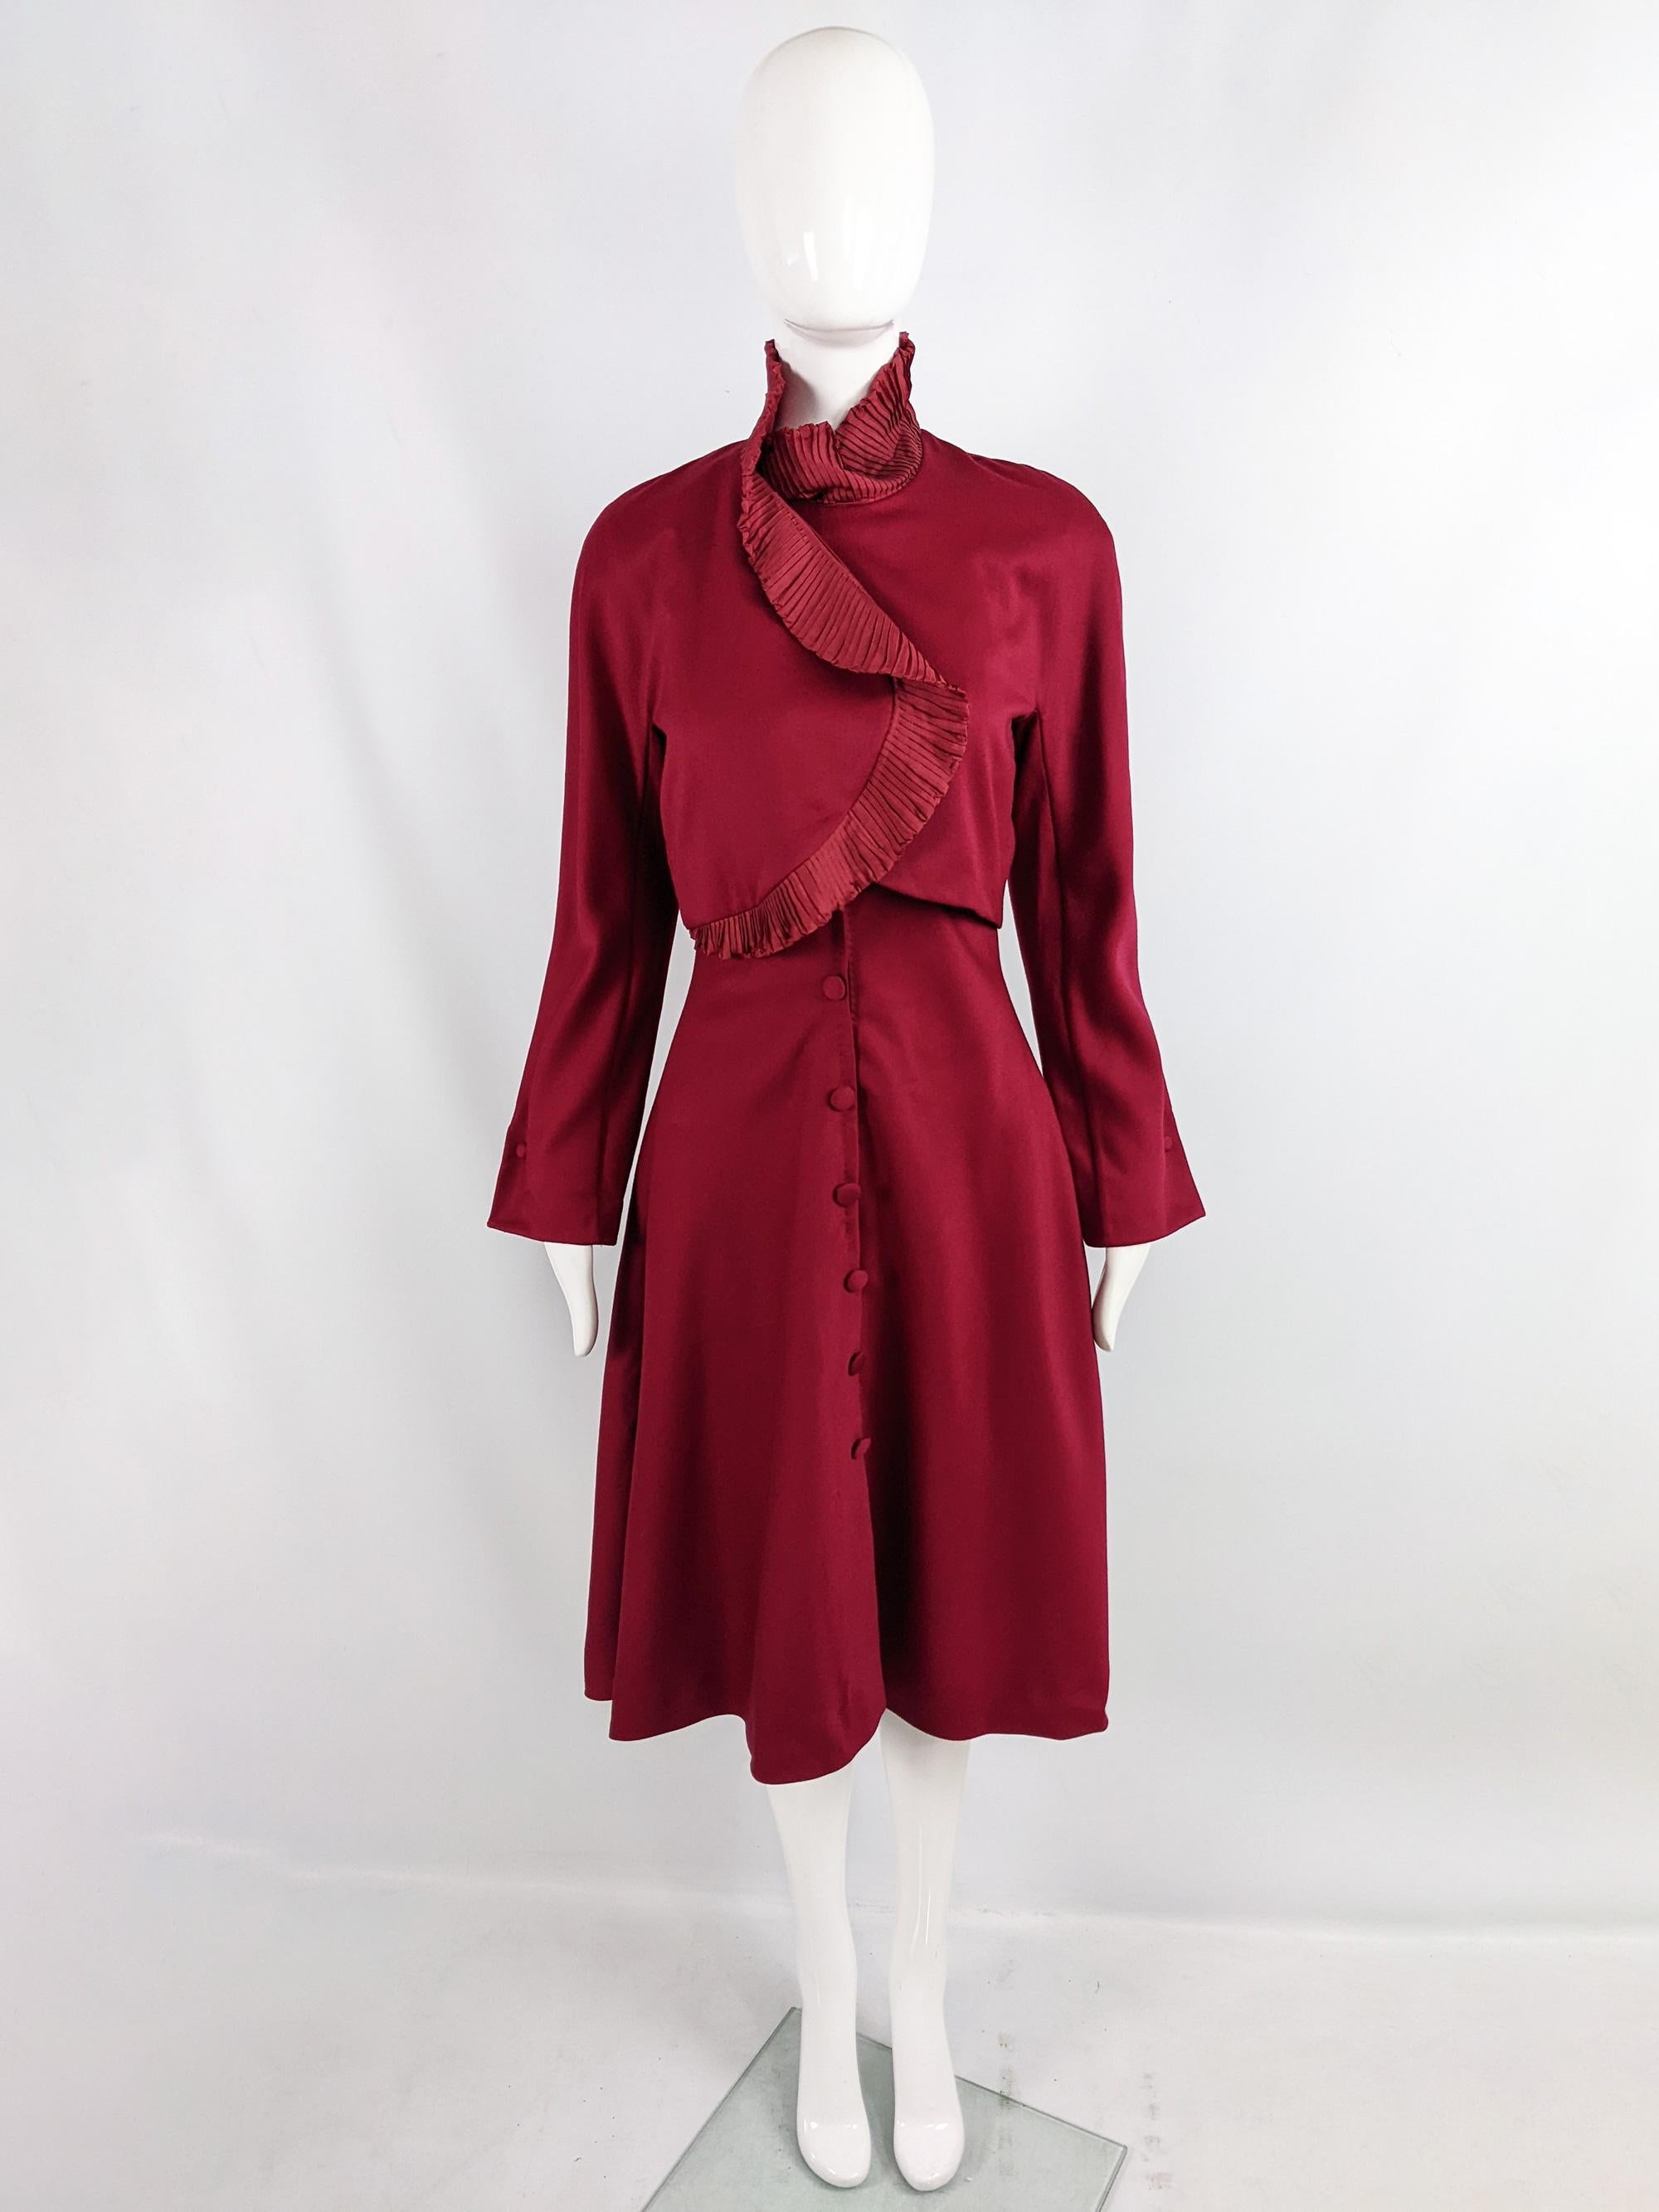 An incredible vintage womens dress from the 80s by luxury Italian fashion designer, Eli Colaj. Incredibly constructed, in a wine red wool with a sleevless silk taffeta underdress with attached shoulder pads and an attached long sleeve jacket with a